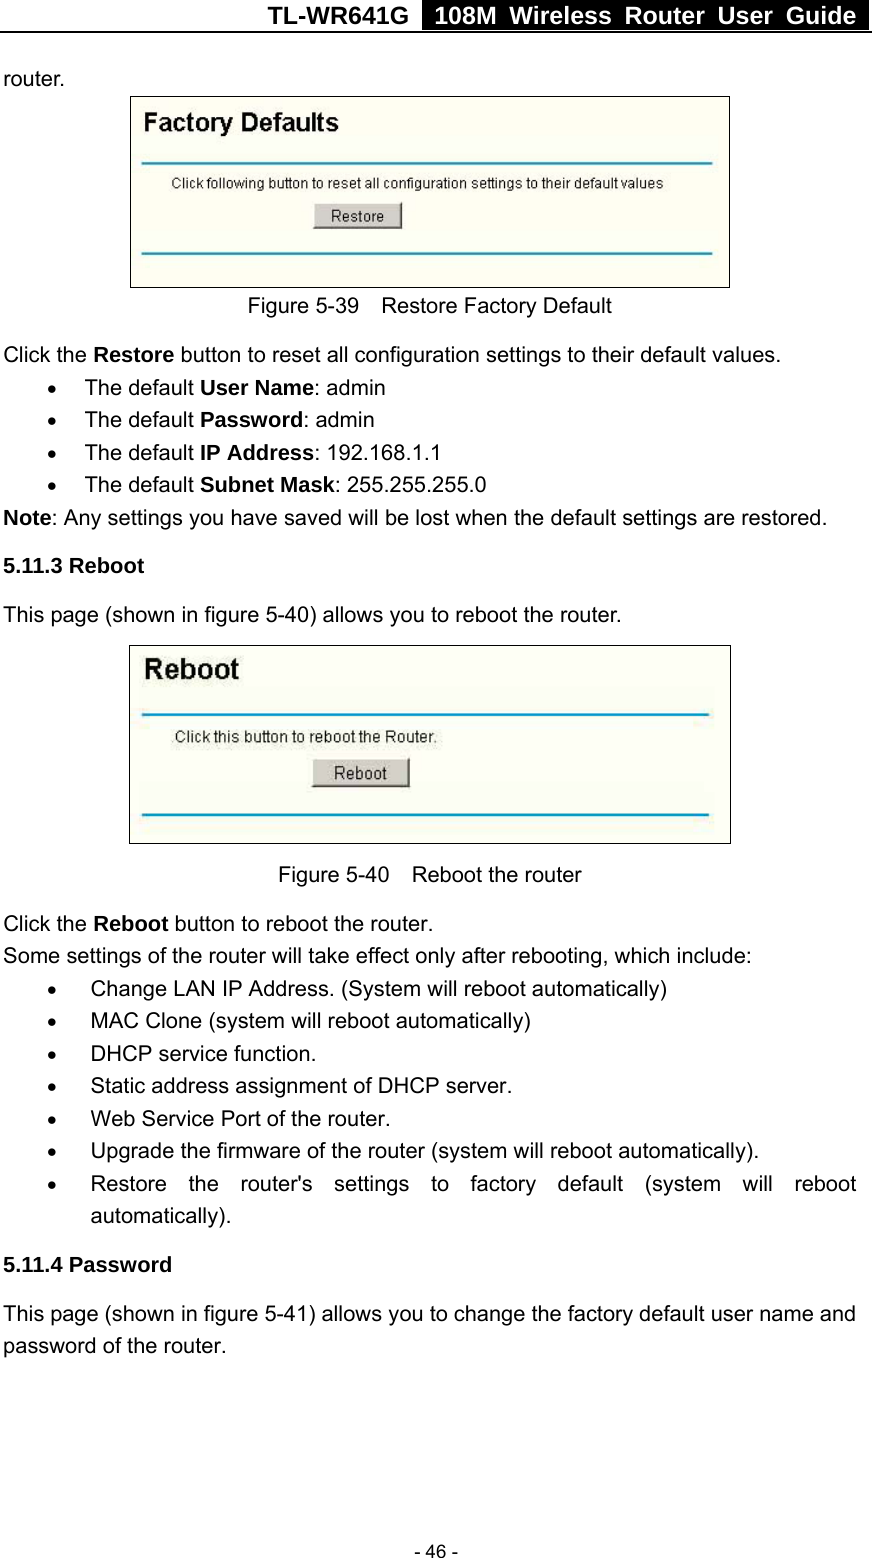 TL-WR641G   108M Wireless Router User Guide   - 46 -router.  Figure 5-39    Restore Factory Default Click the Restore button to reset all configuration settings to their default values.   • The default User Name: admin • The default Password: admin • The default IP Address: 192.168.1.1 • The default Subnet Mask: 255.255.255.0 Note: Any settings you have saved will be lost when the default settings are restored. 5.11.3 Reboot This page (shown in figure 5-40) allows you to reboot the router.  Figure 5-40    Reboot the router Click the Reboot button to reboot the router. Some settings of the router will take effect only after rebooting, which include: • Change LAN IP Address. (System will reboot automatically) • MAC Clone (system will reboot automatically) • DHCP service function. • Static address assignment of DHCP server. • Web Service Port of the router. • Upgrade the firmware of the router (system will reboot automatically). • Restore the router&apos;s settings to factory default (system will reboot automatically). 5.11.4 Password This page (shown in figure 5-41) allows you to change the factory default user name and password of the router.   